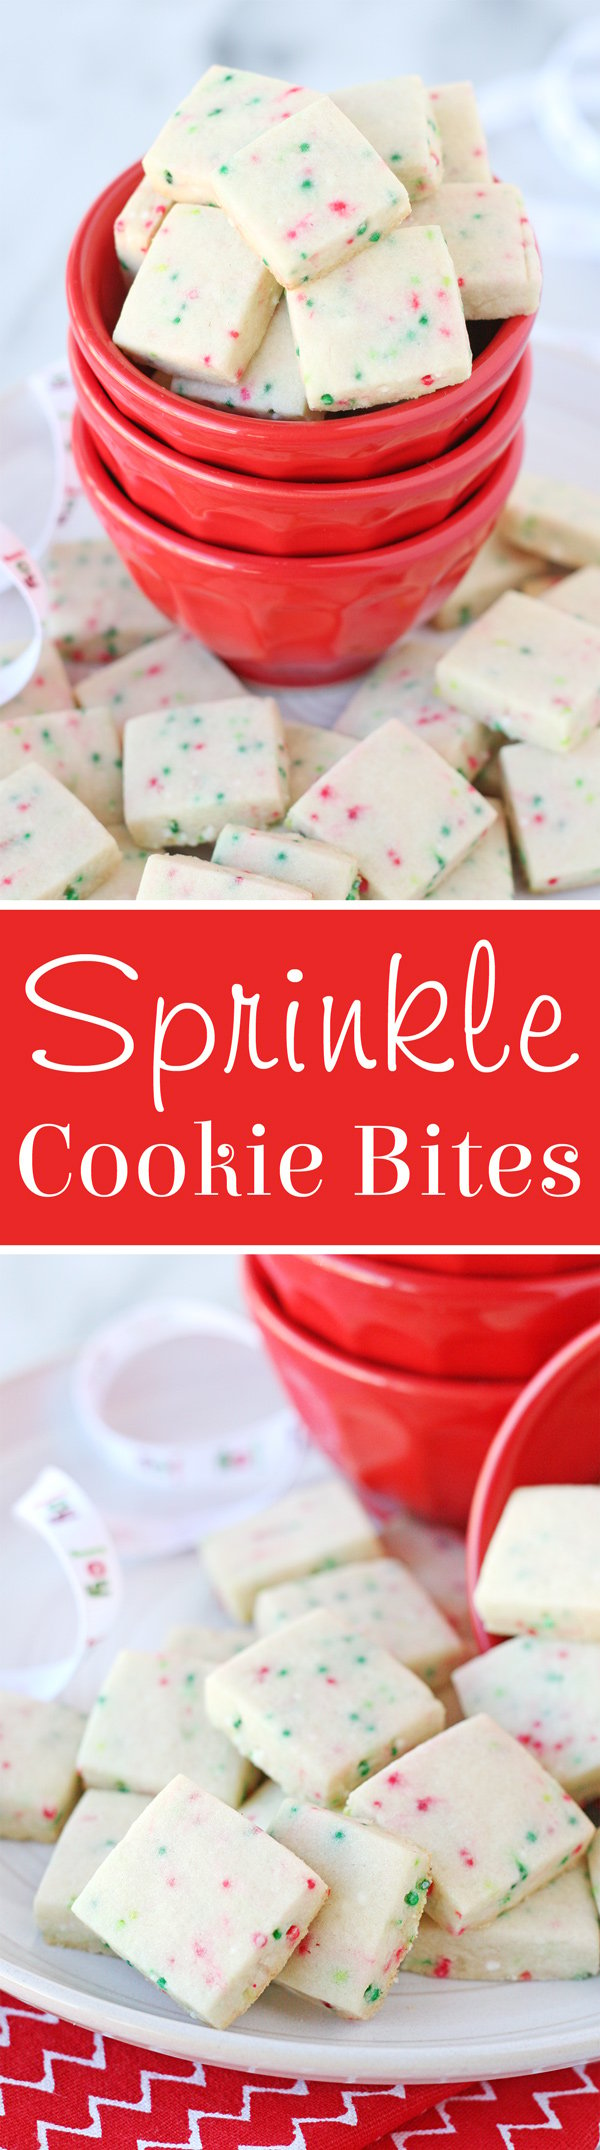 These little Christmas Sprinkle Cookie Bites are perfectly cute, festive and delicious! 